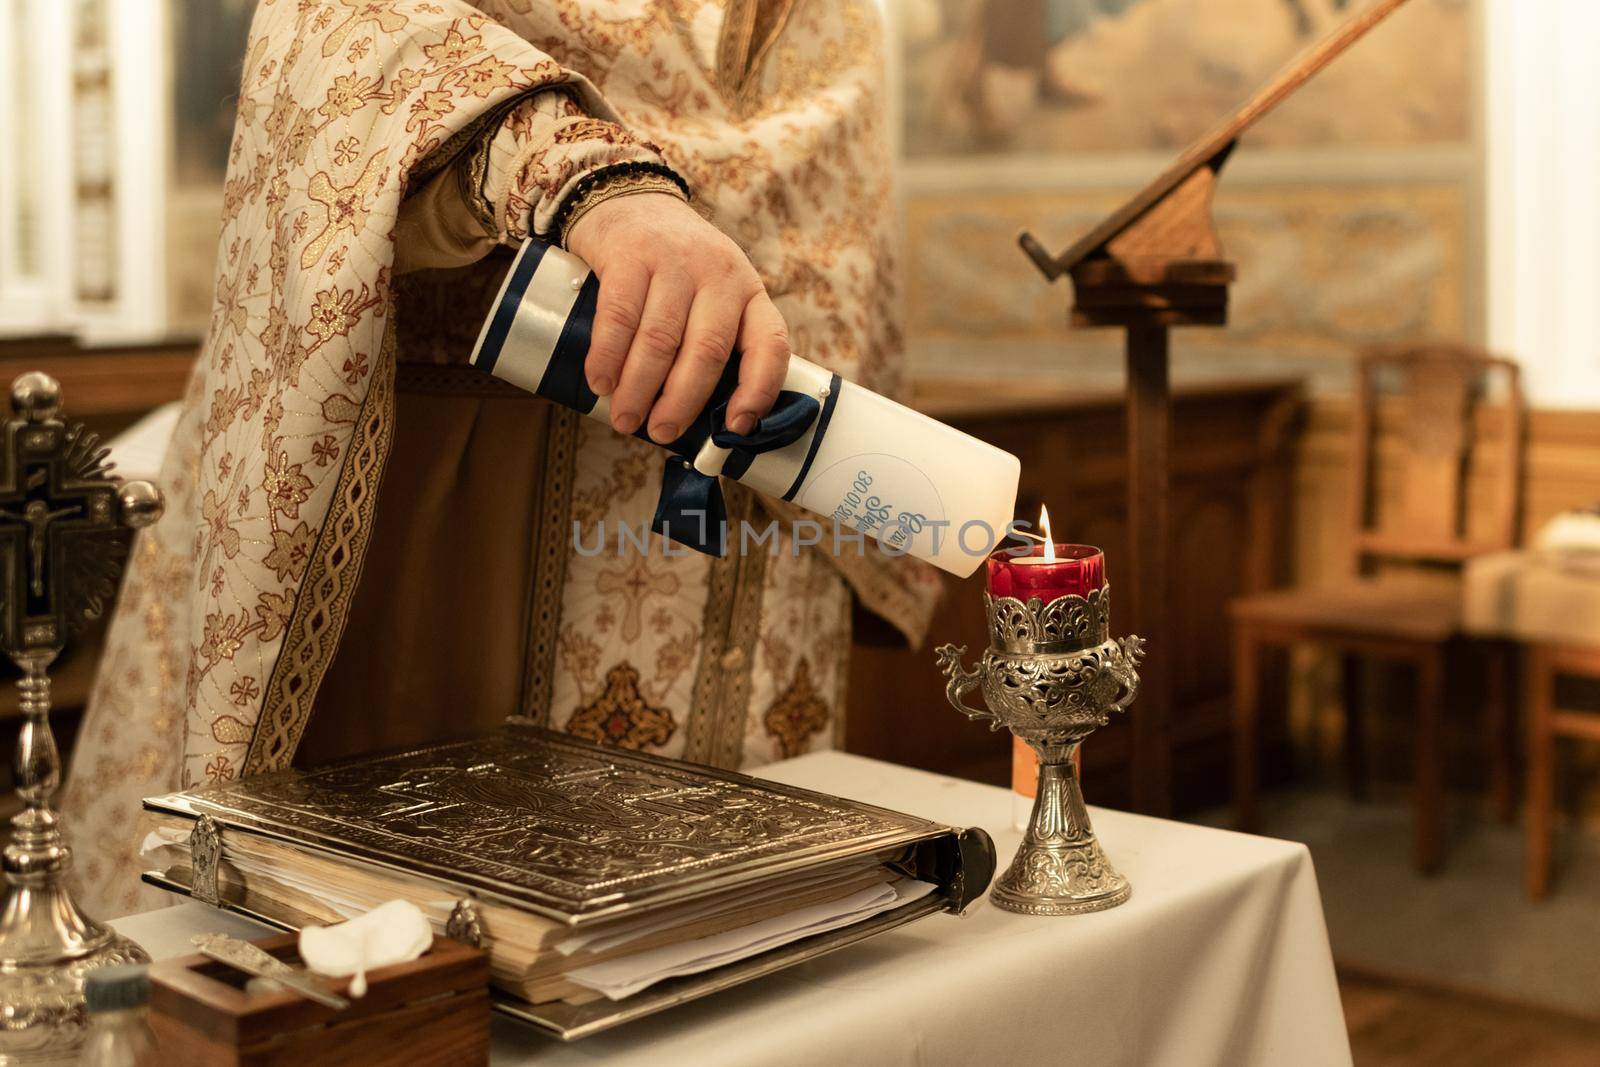 The priest lights a candle for the rite of baptism by Godi